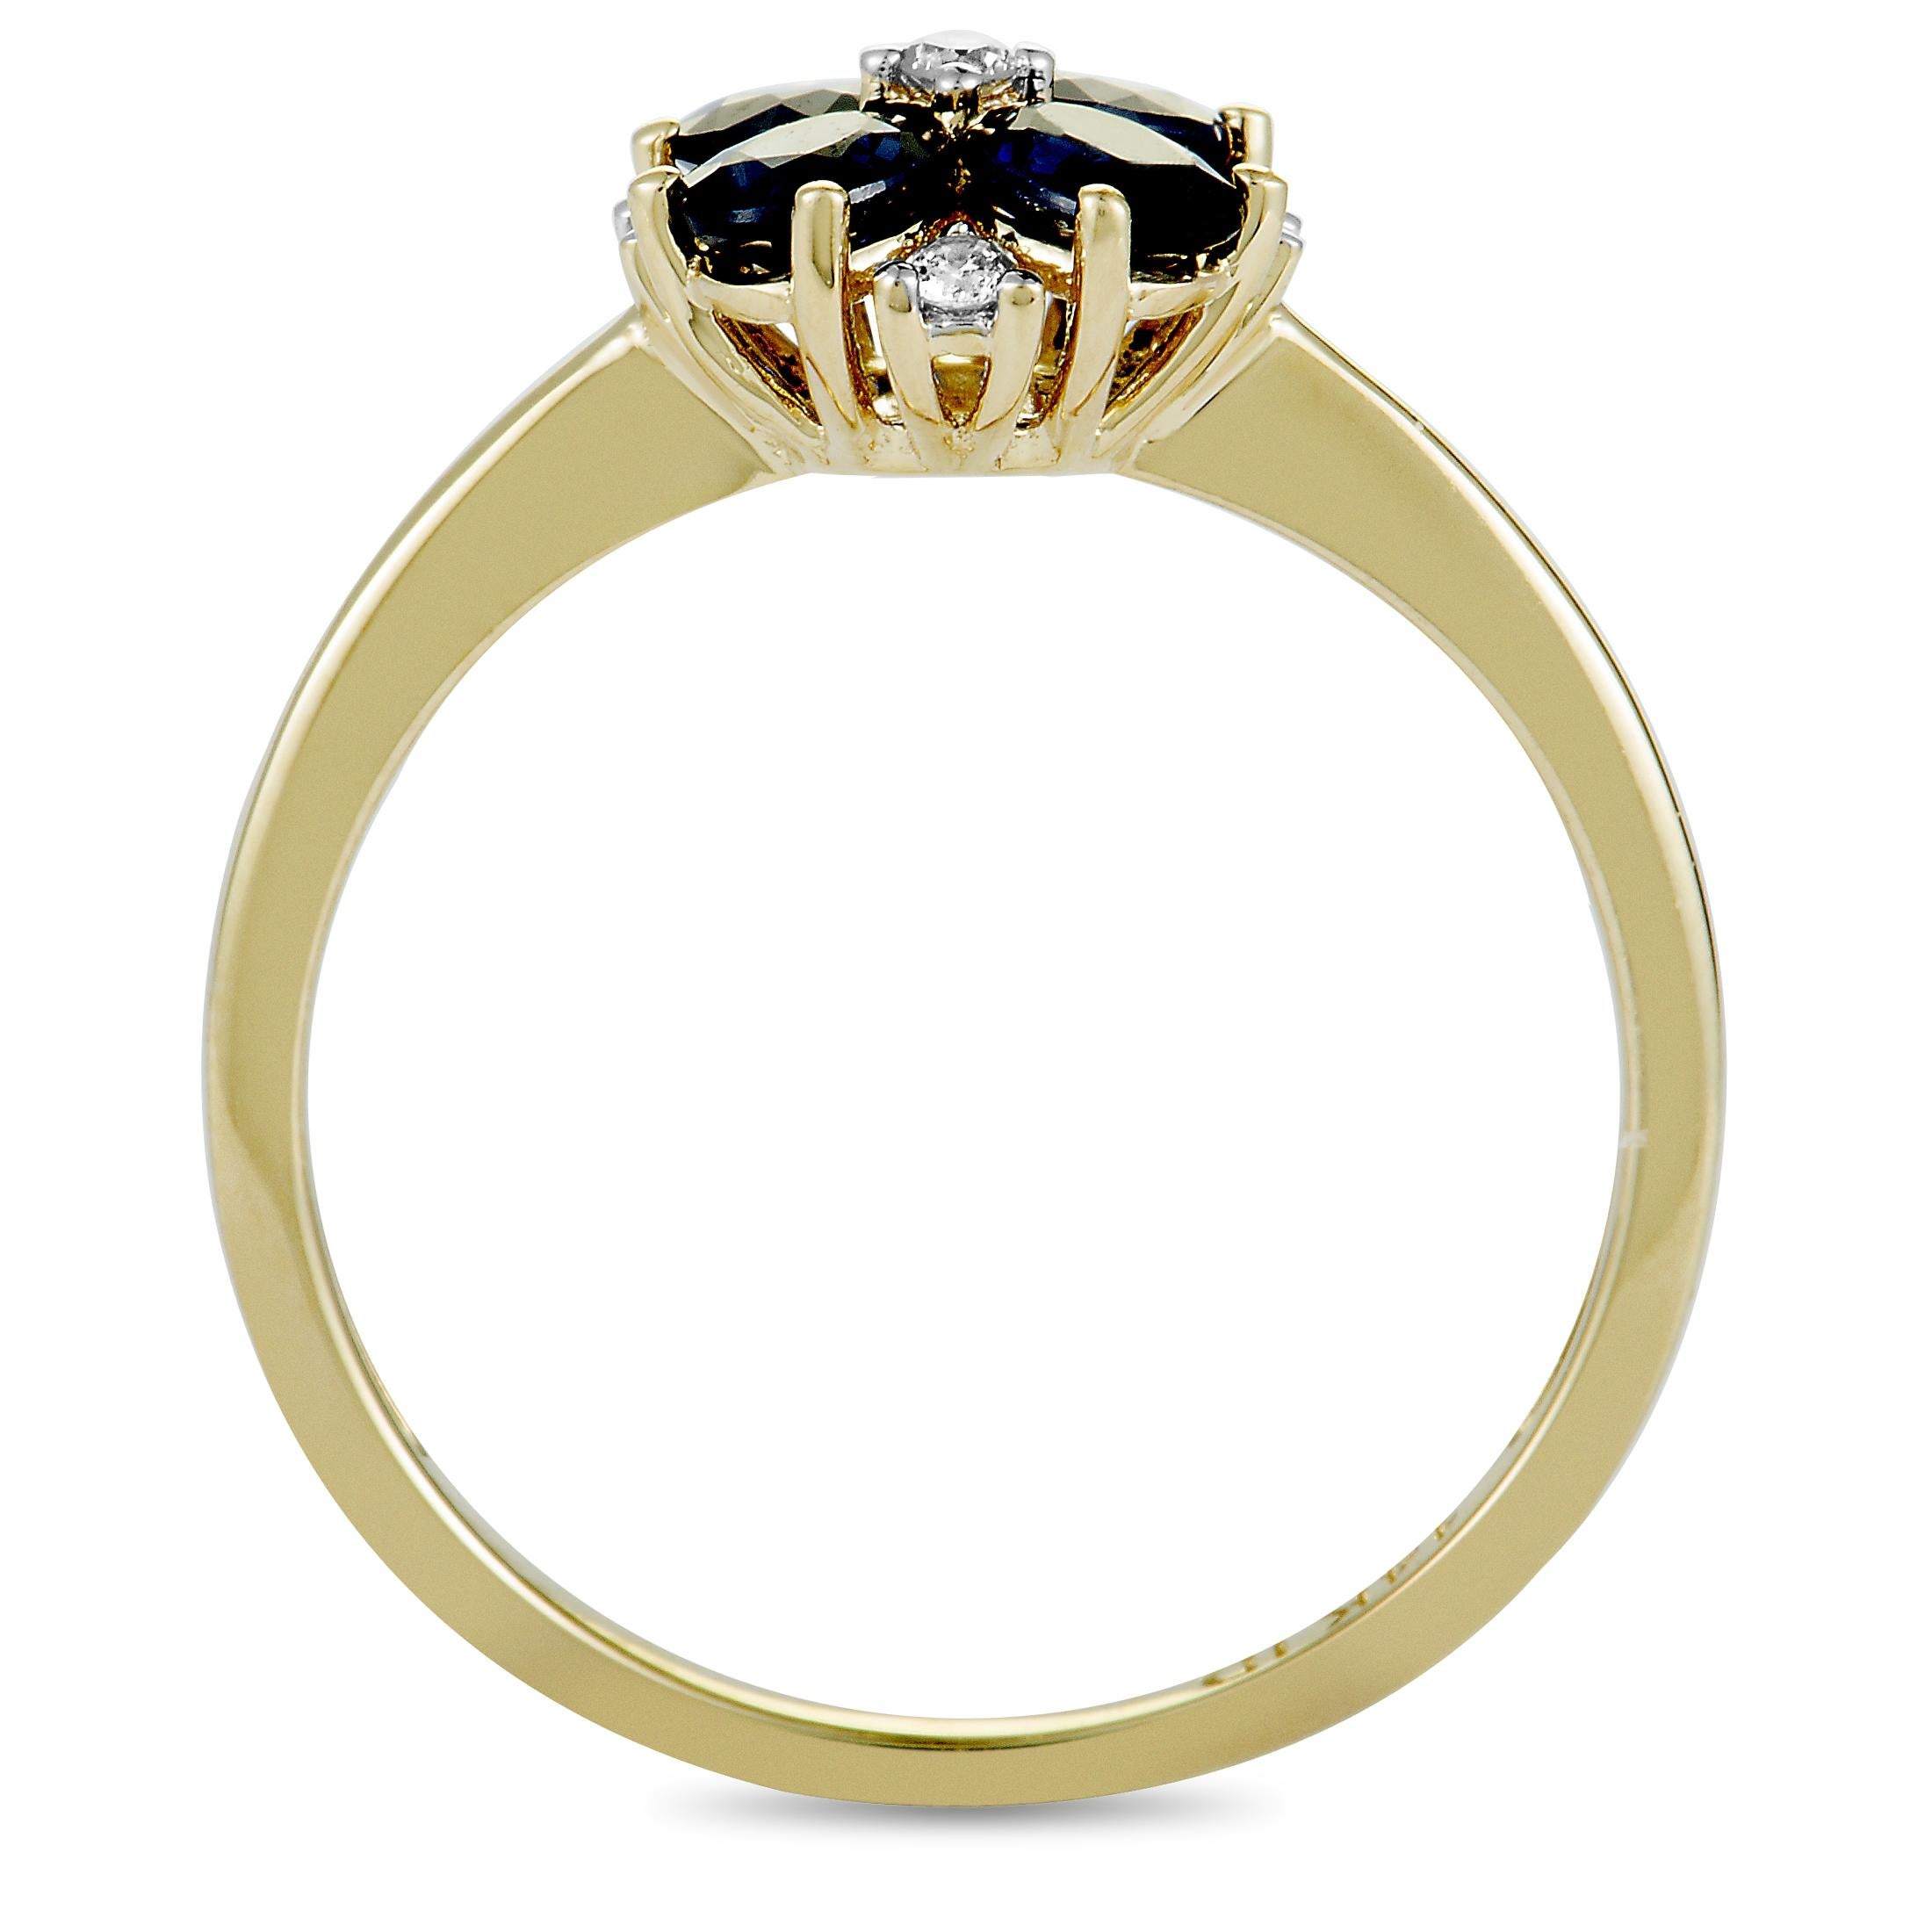 This ring is made of 14K yellow gold and weighs 2 grams. It is set with sapphires and a total of 0.08 carats of diamonds. The ring boasts band thickness of 1 mm and top height of 5 mm, with top dimensions measuring 9 by 8 mm.
 
 Offered in brand new